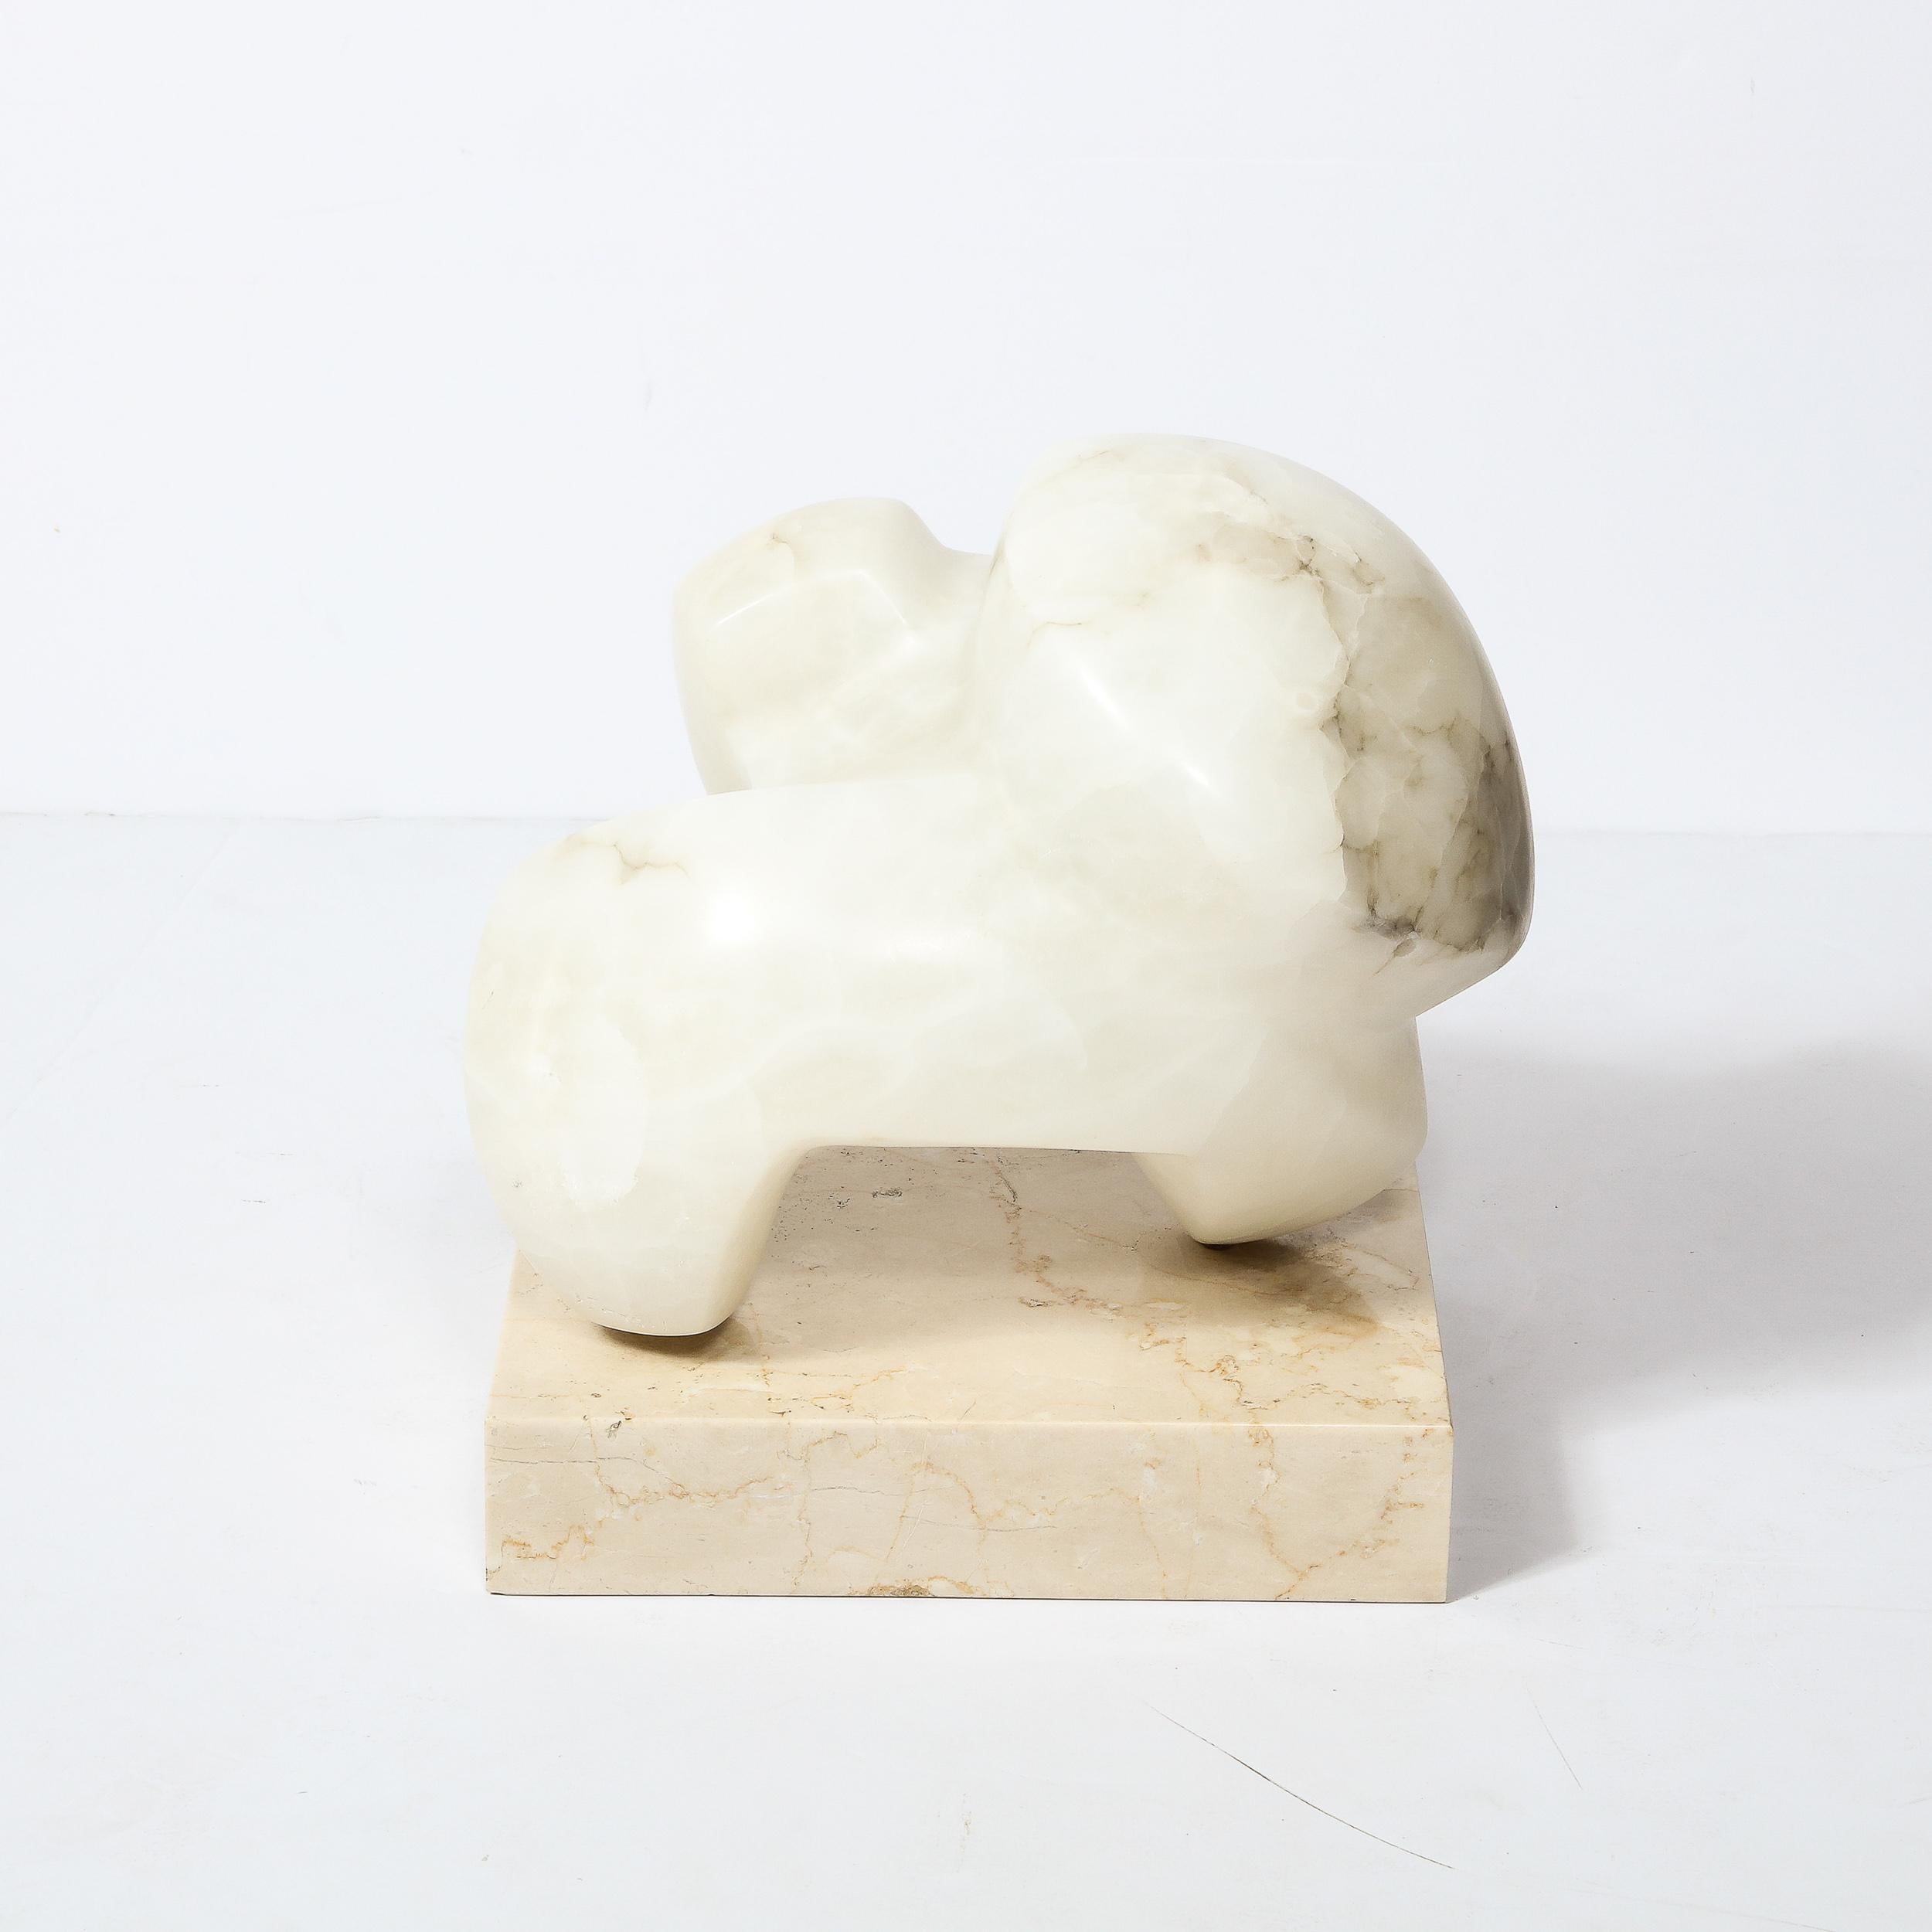 This Mid-Century Modernist Abstract Sculpture in Alabaster on a Marble base was created by the artist Julie Small Gambly in the United States Circa 1985. Featuring gorgeous veining in the alabaster and a rectilinear solid marble base, this